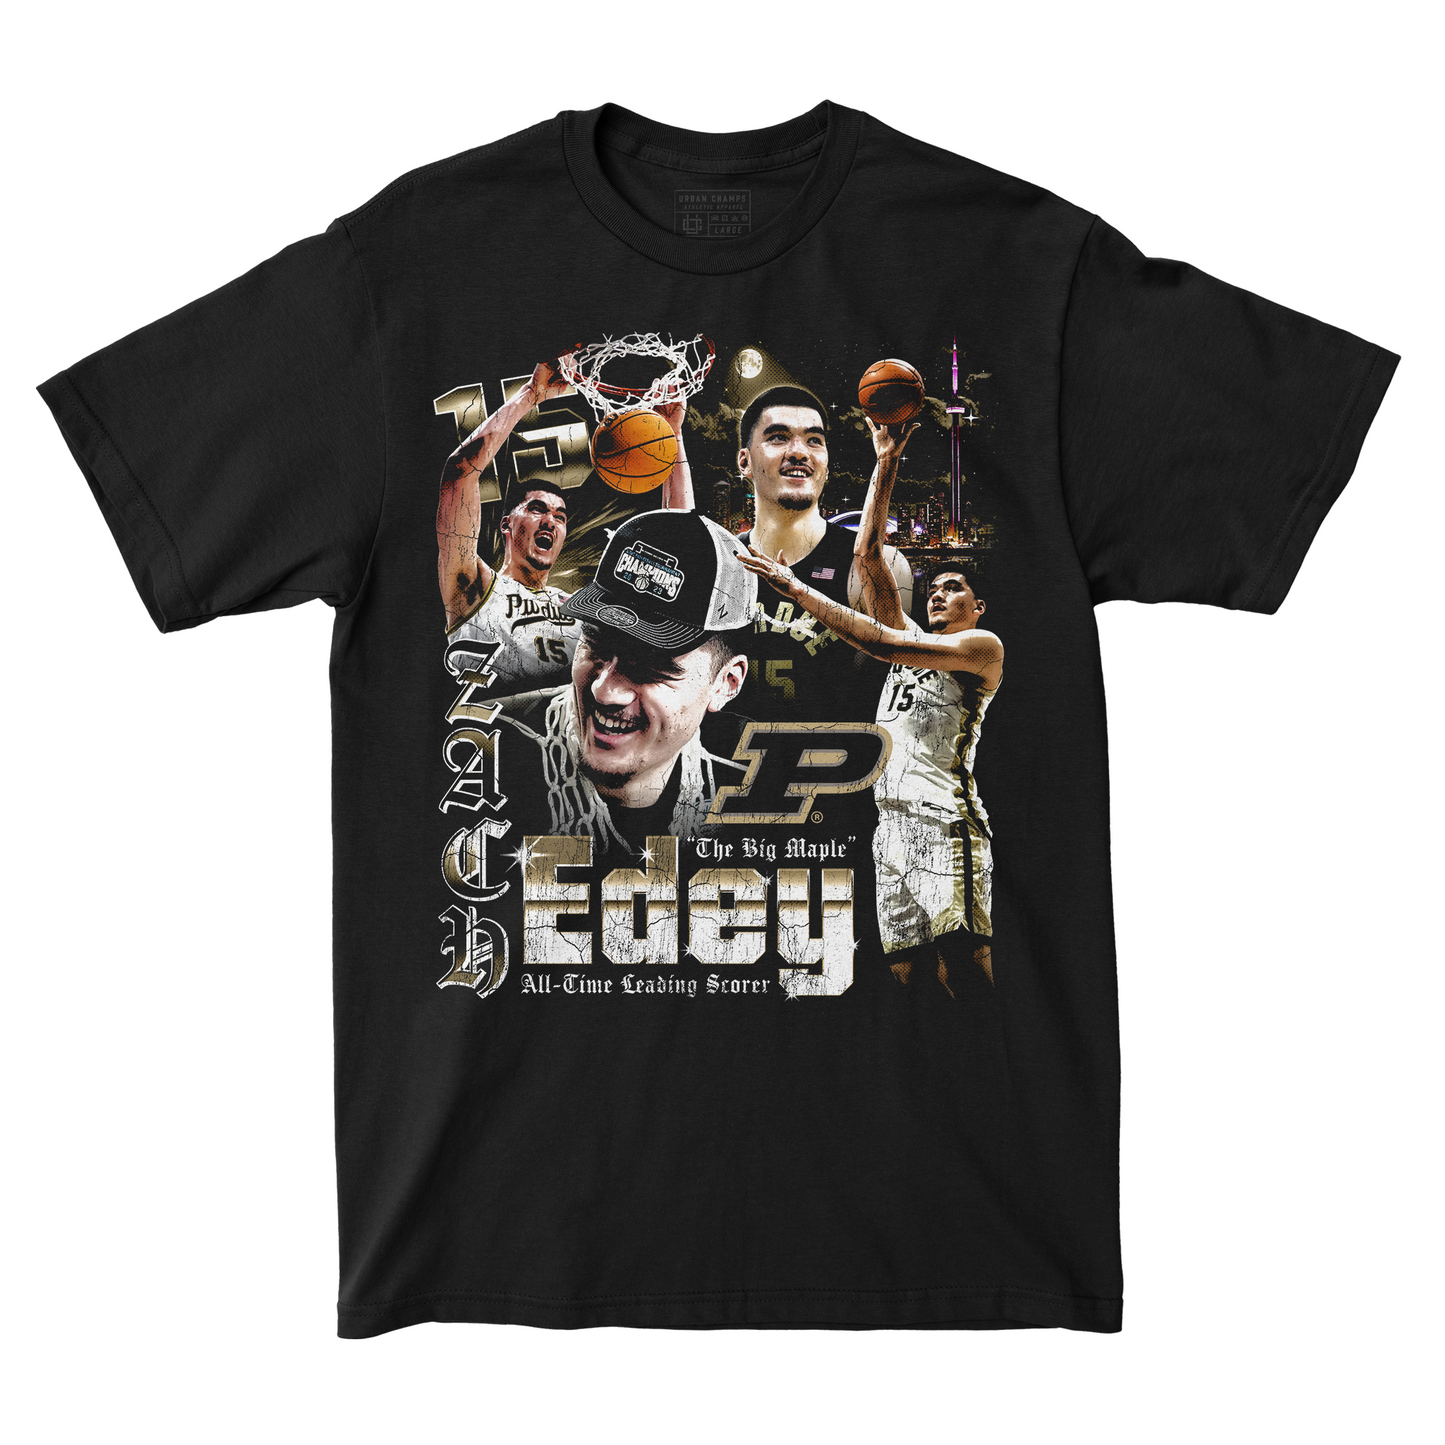 EXCLUSIVE RELEASE - Edey Farewell Tee